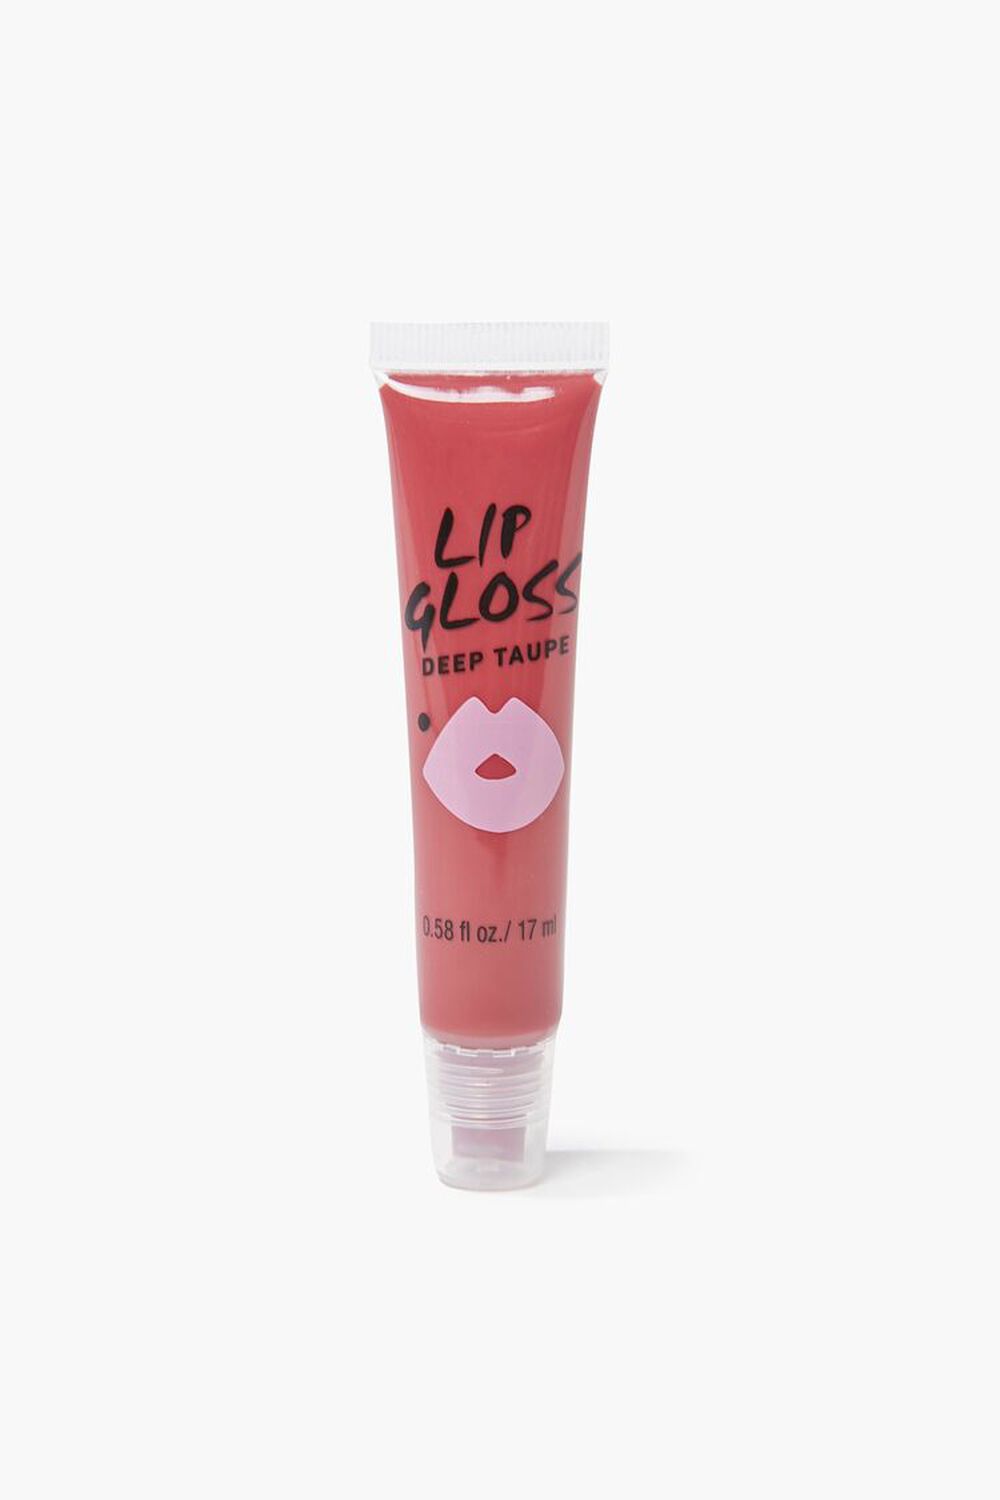 DEEP TAUPE Squeeze Tube Lip Gloss, image 1